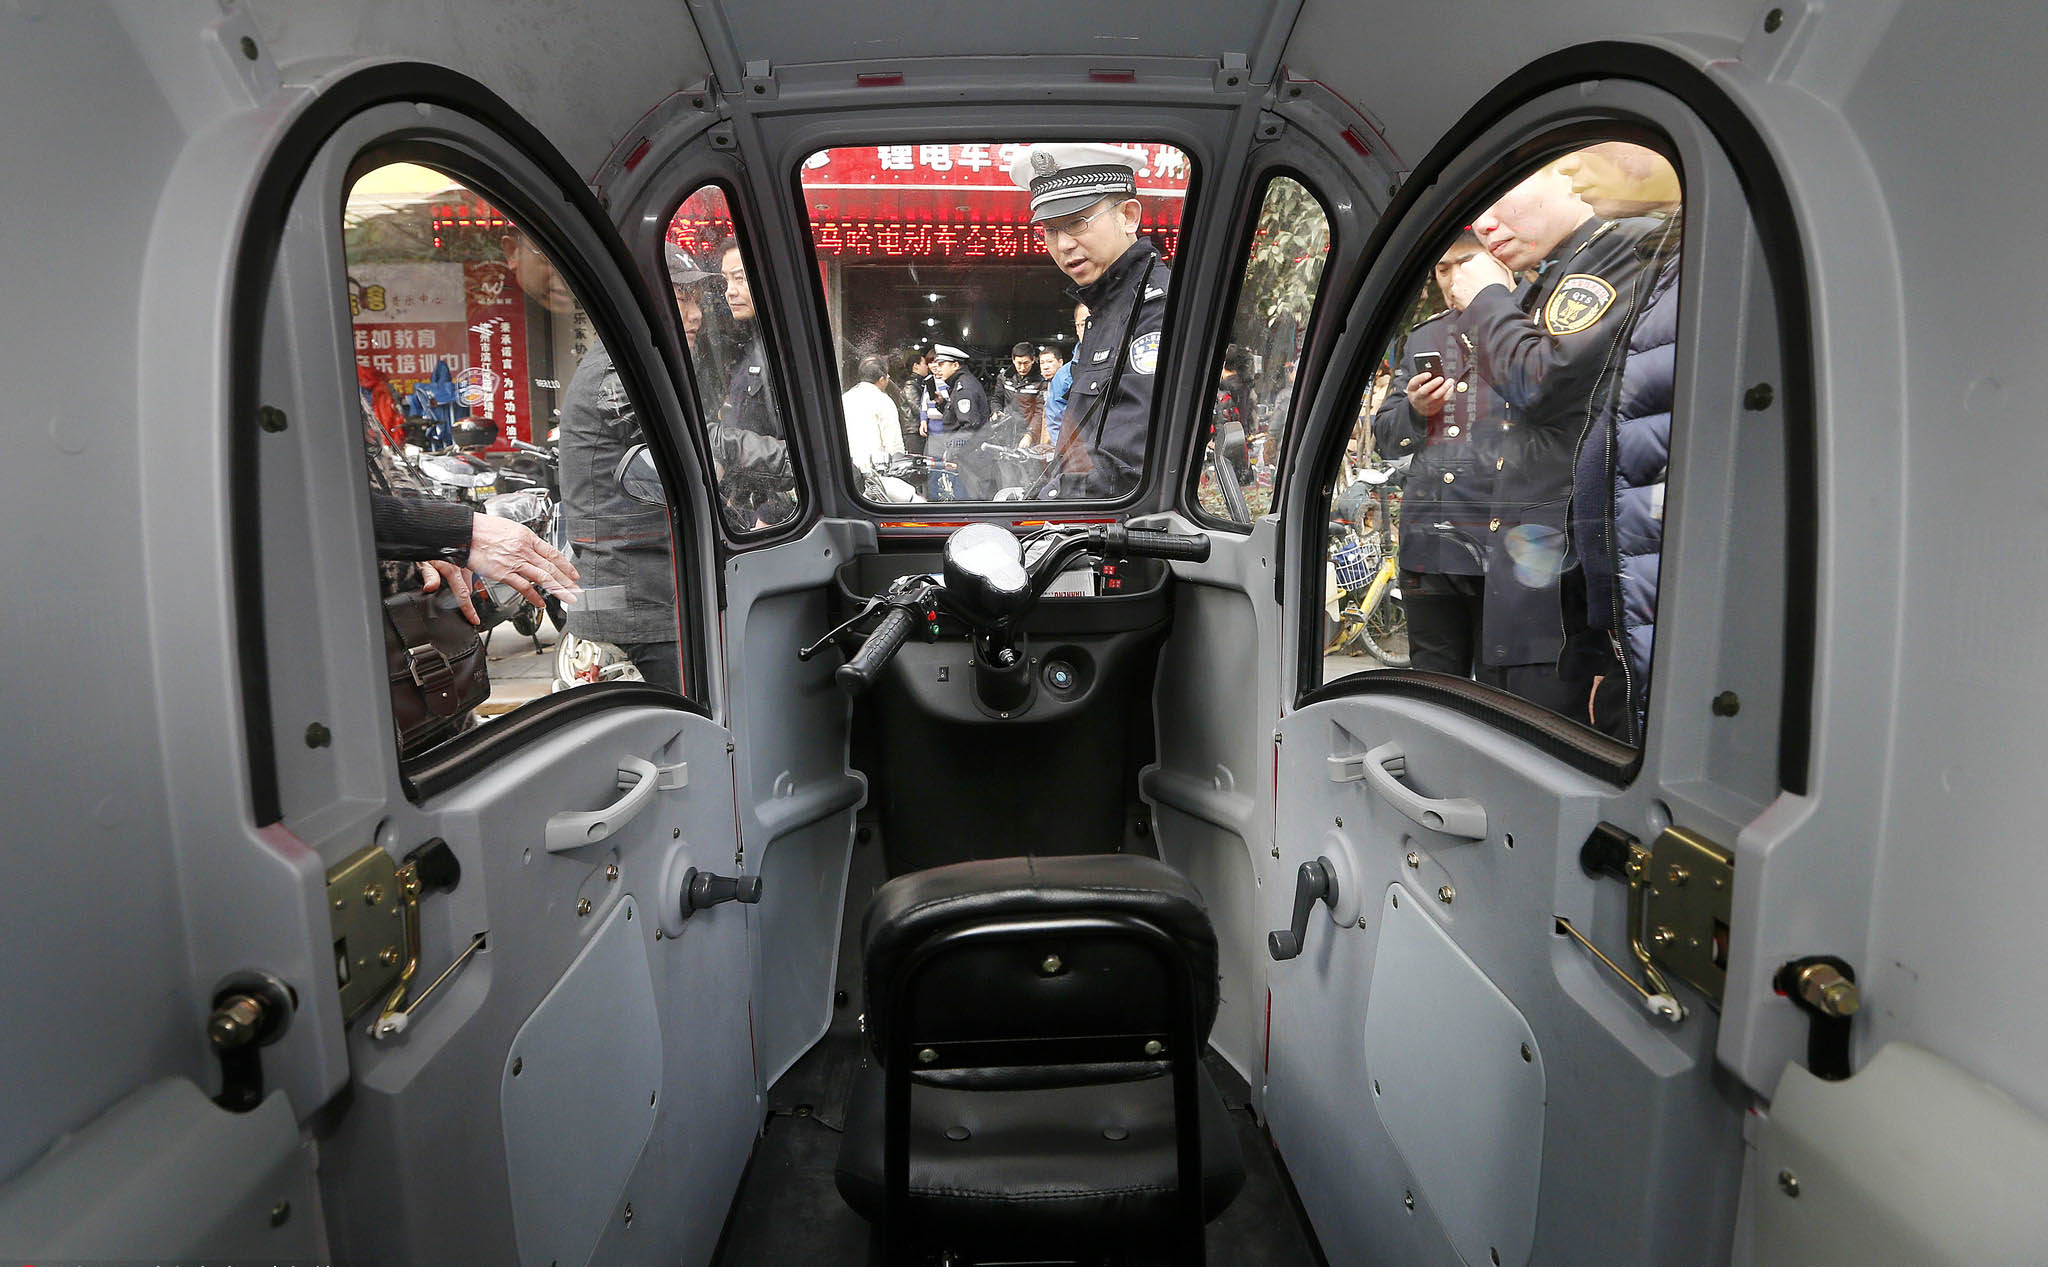 Police inspect an unlicensed electric car in Hangzhou, March 11, 2014. IC